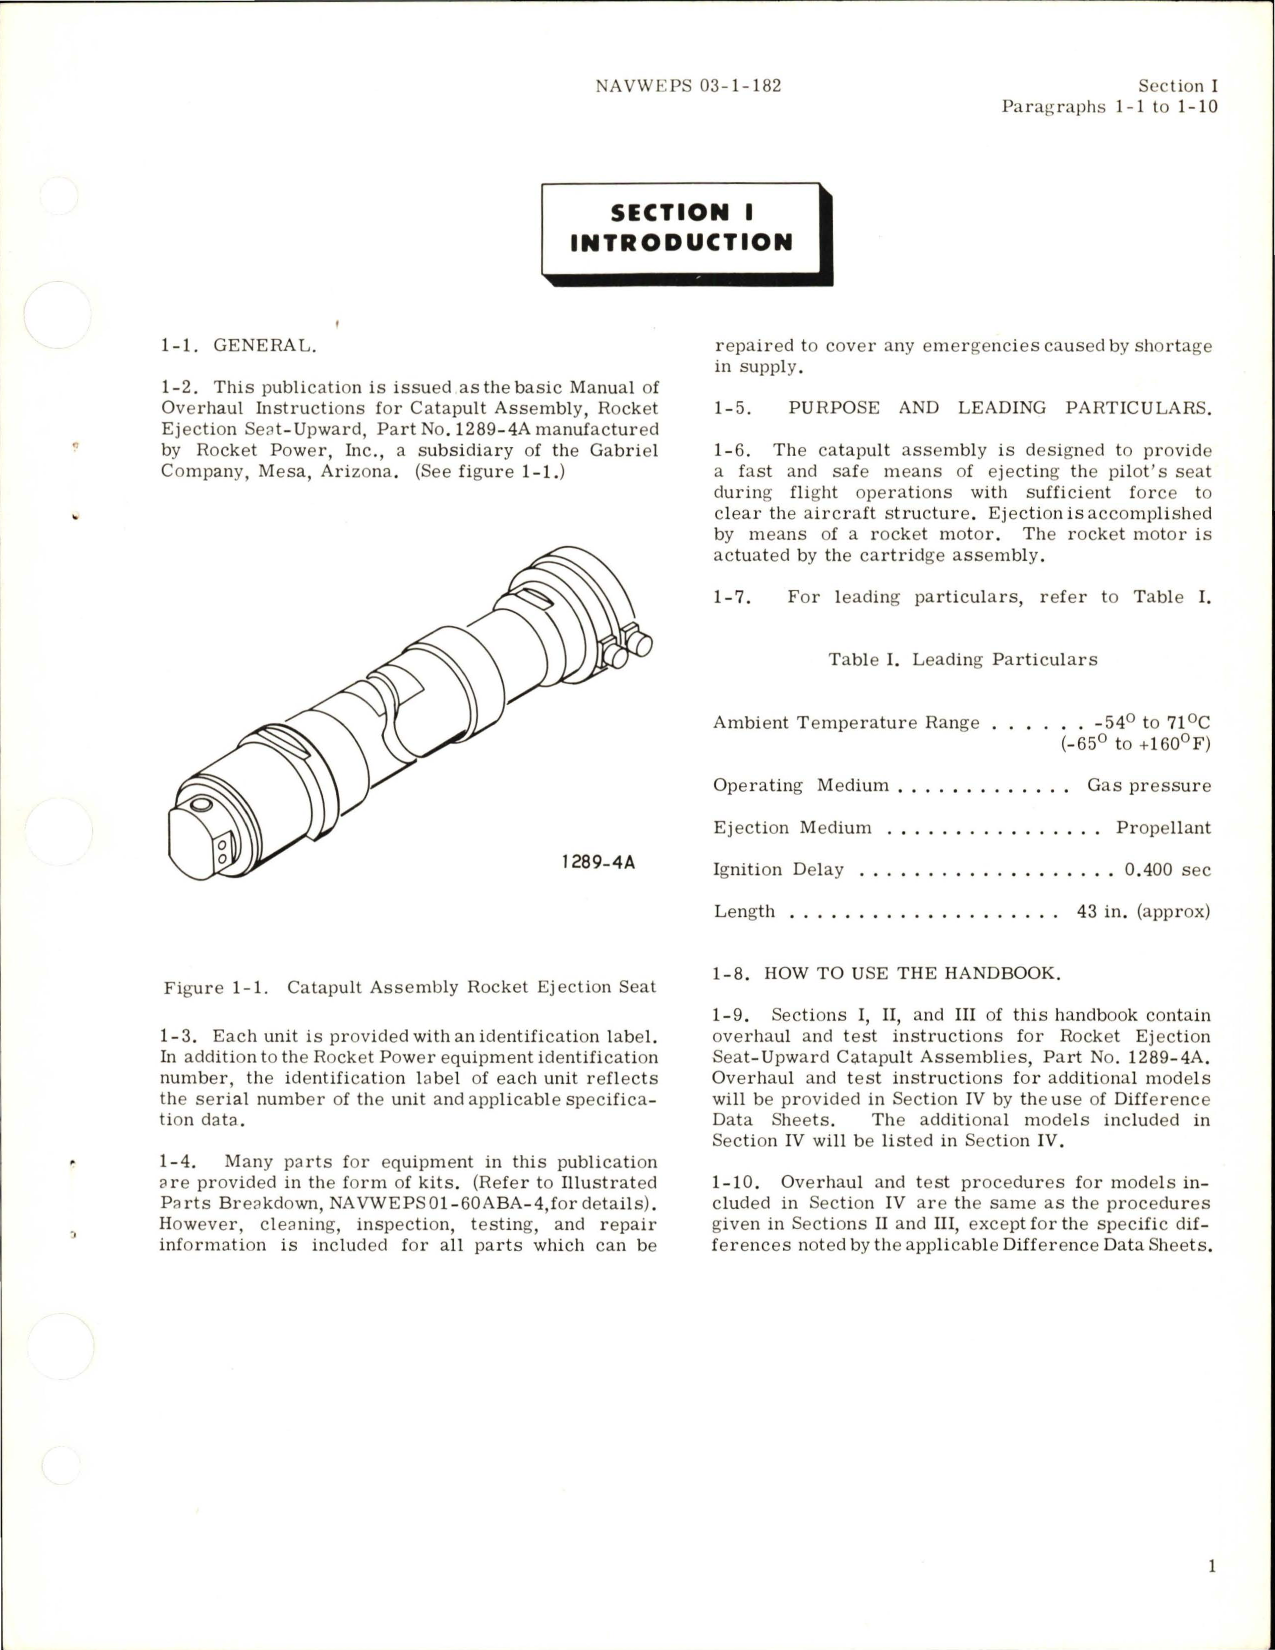 Sample page 5 from AirCorps Library document: Overhaul Instructions for Rocket Ejection Seat-Upward Catapult Assembly - Part 1289-4A 